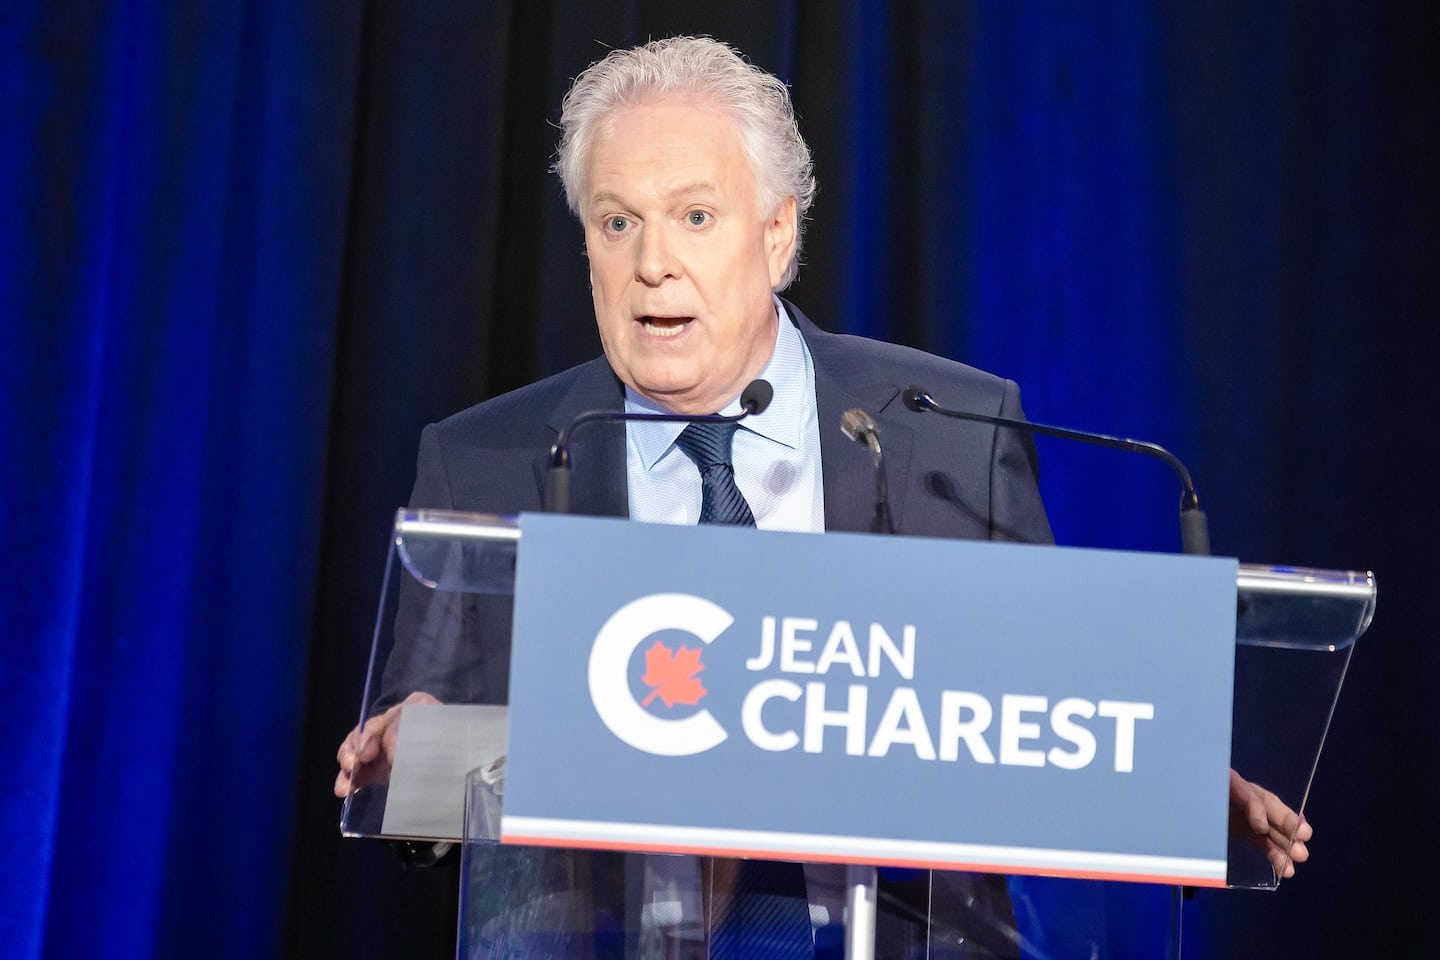 The end of beans for Jean Charest?